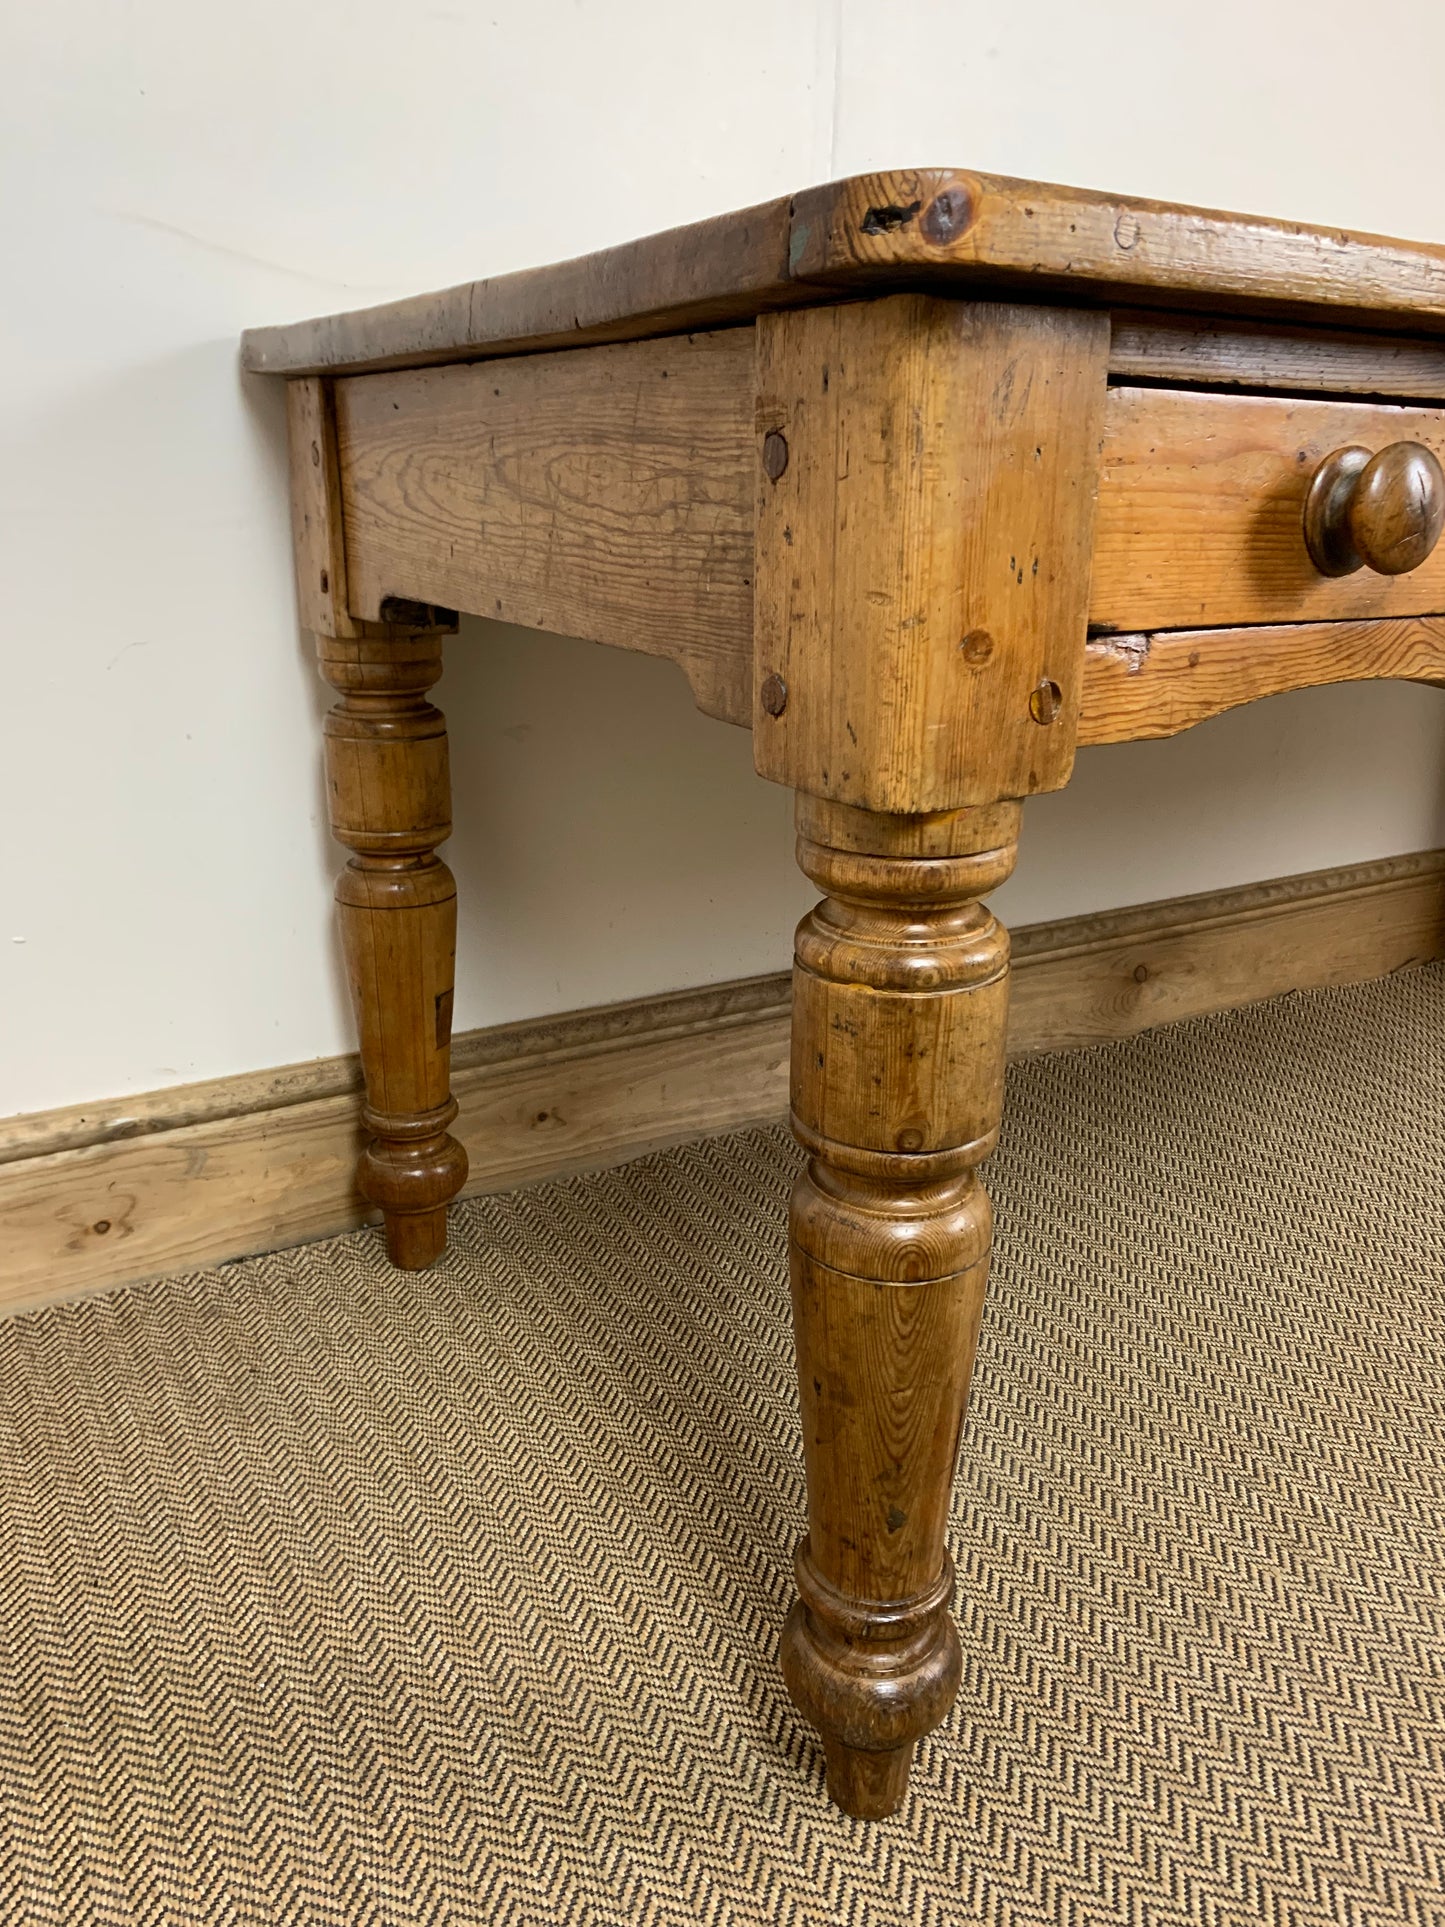 Georgian Antique Farmhouse Country Welsh Pine Serving Table - Timeless Charm for Rustic Interiors